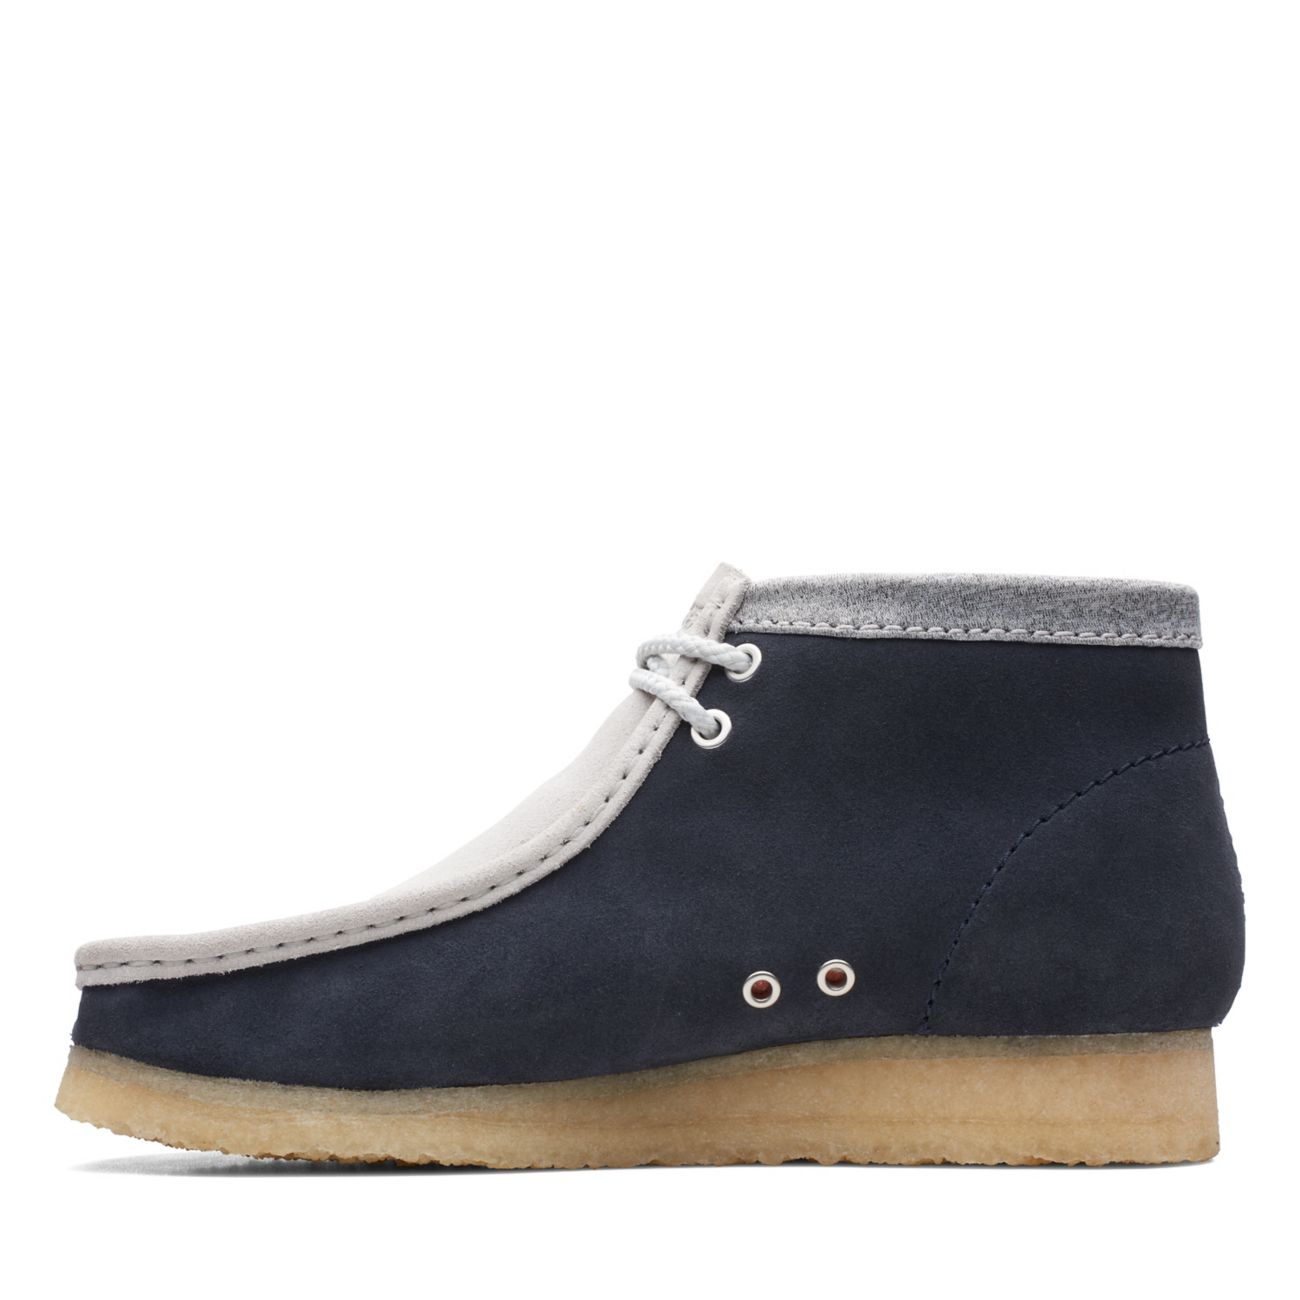 Clarks Shoes - Wallabeebt VCY